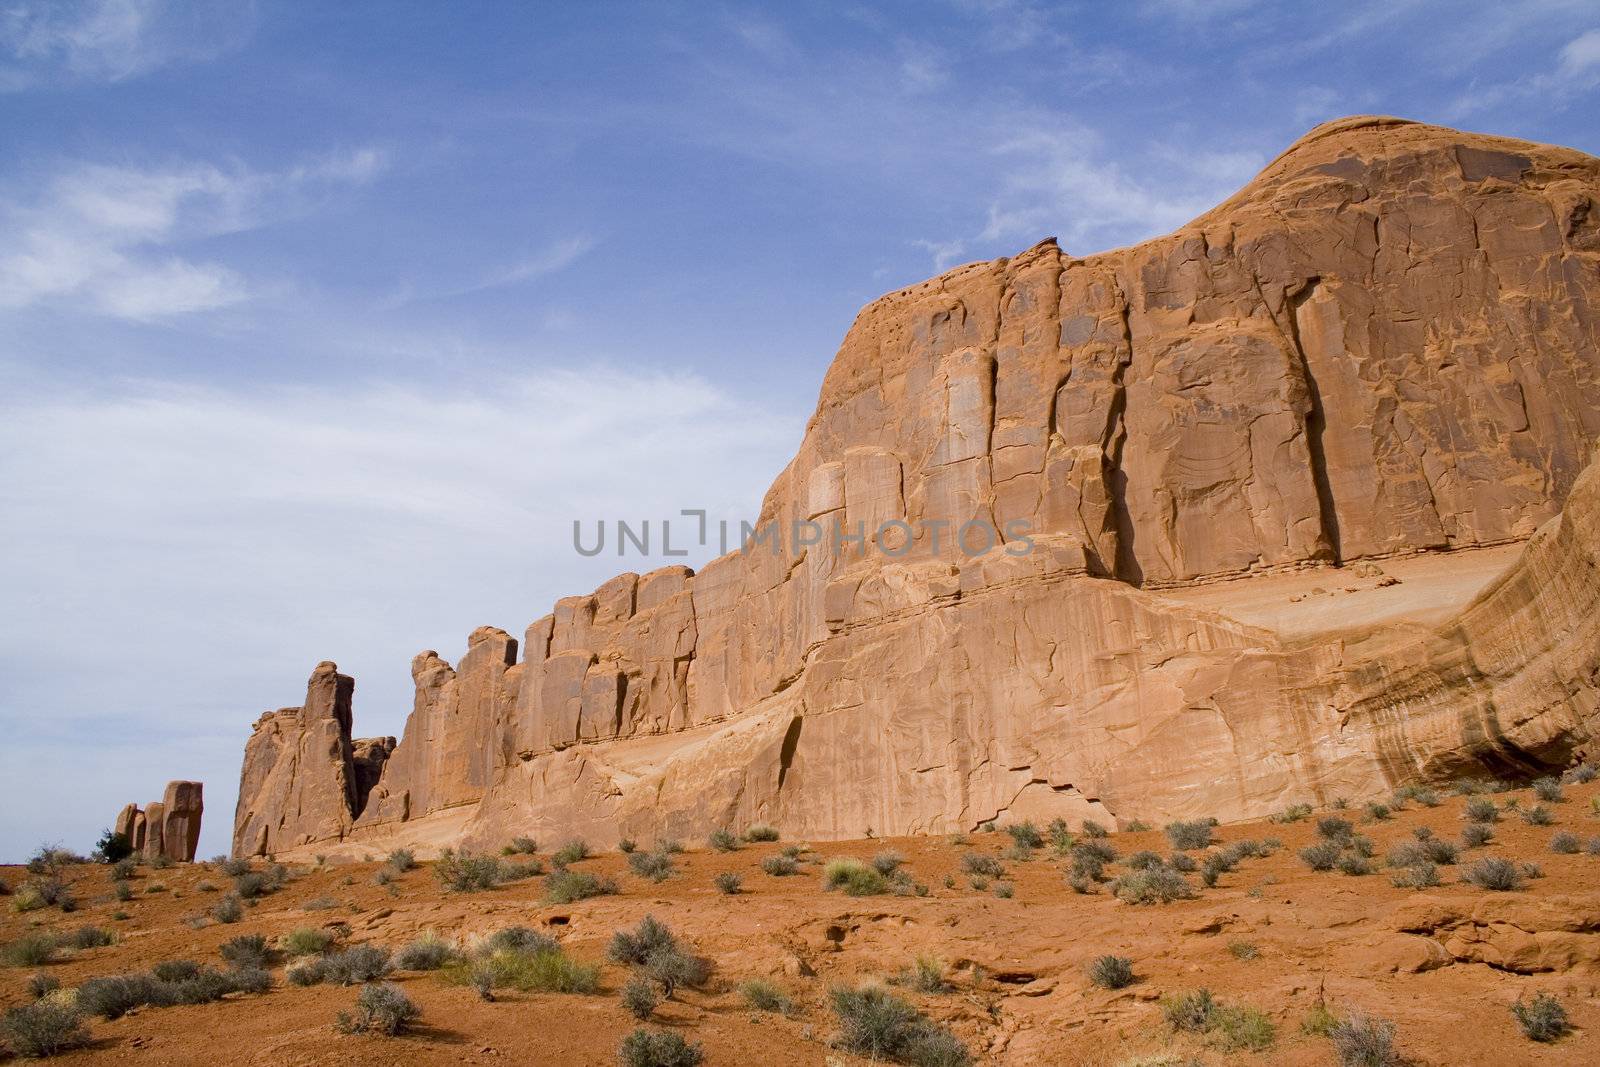 Moab area mountains and spires in Utah USA